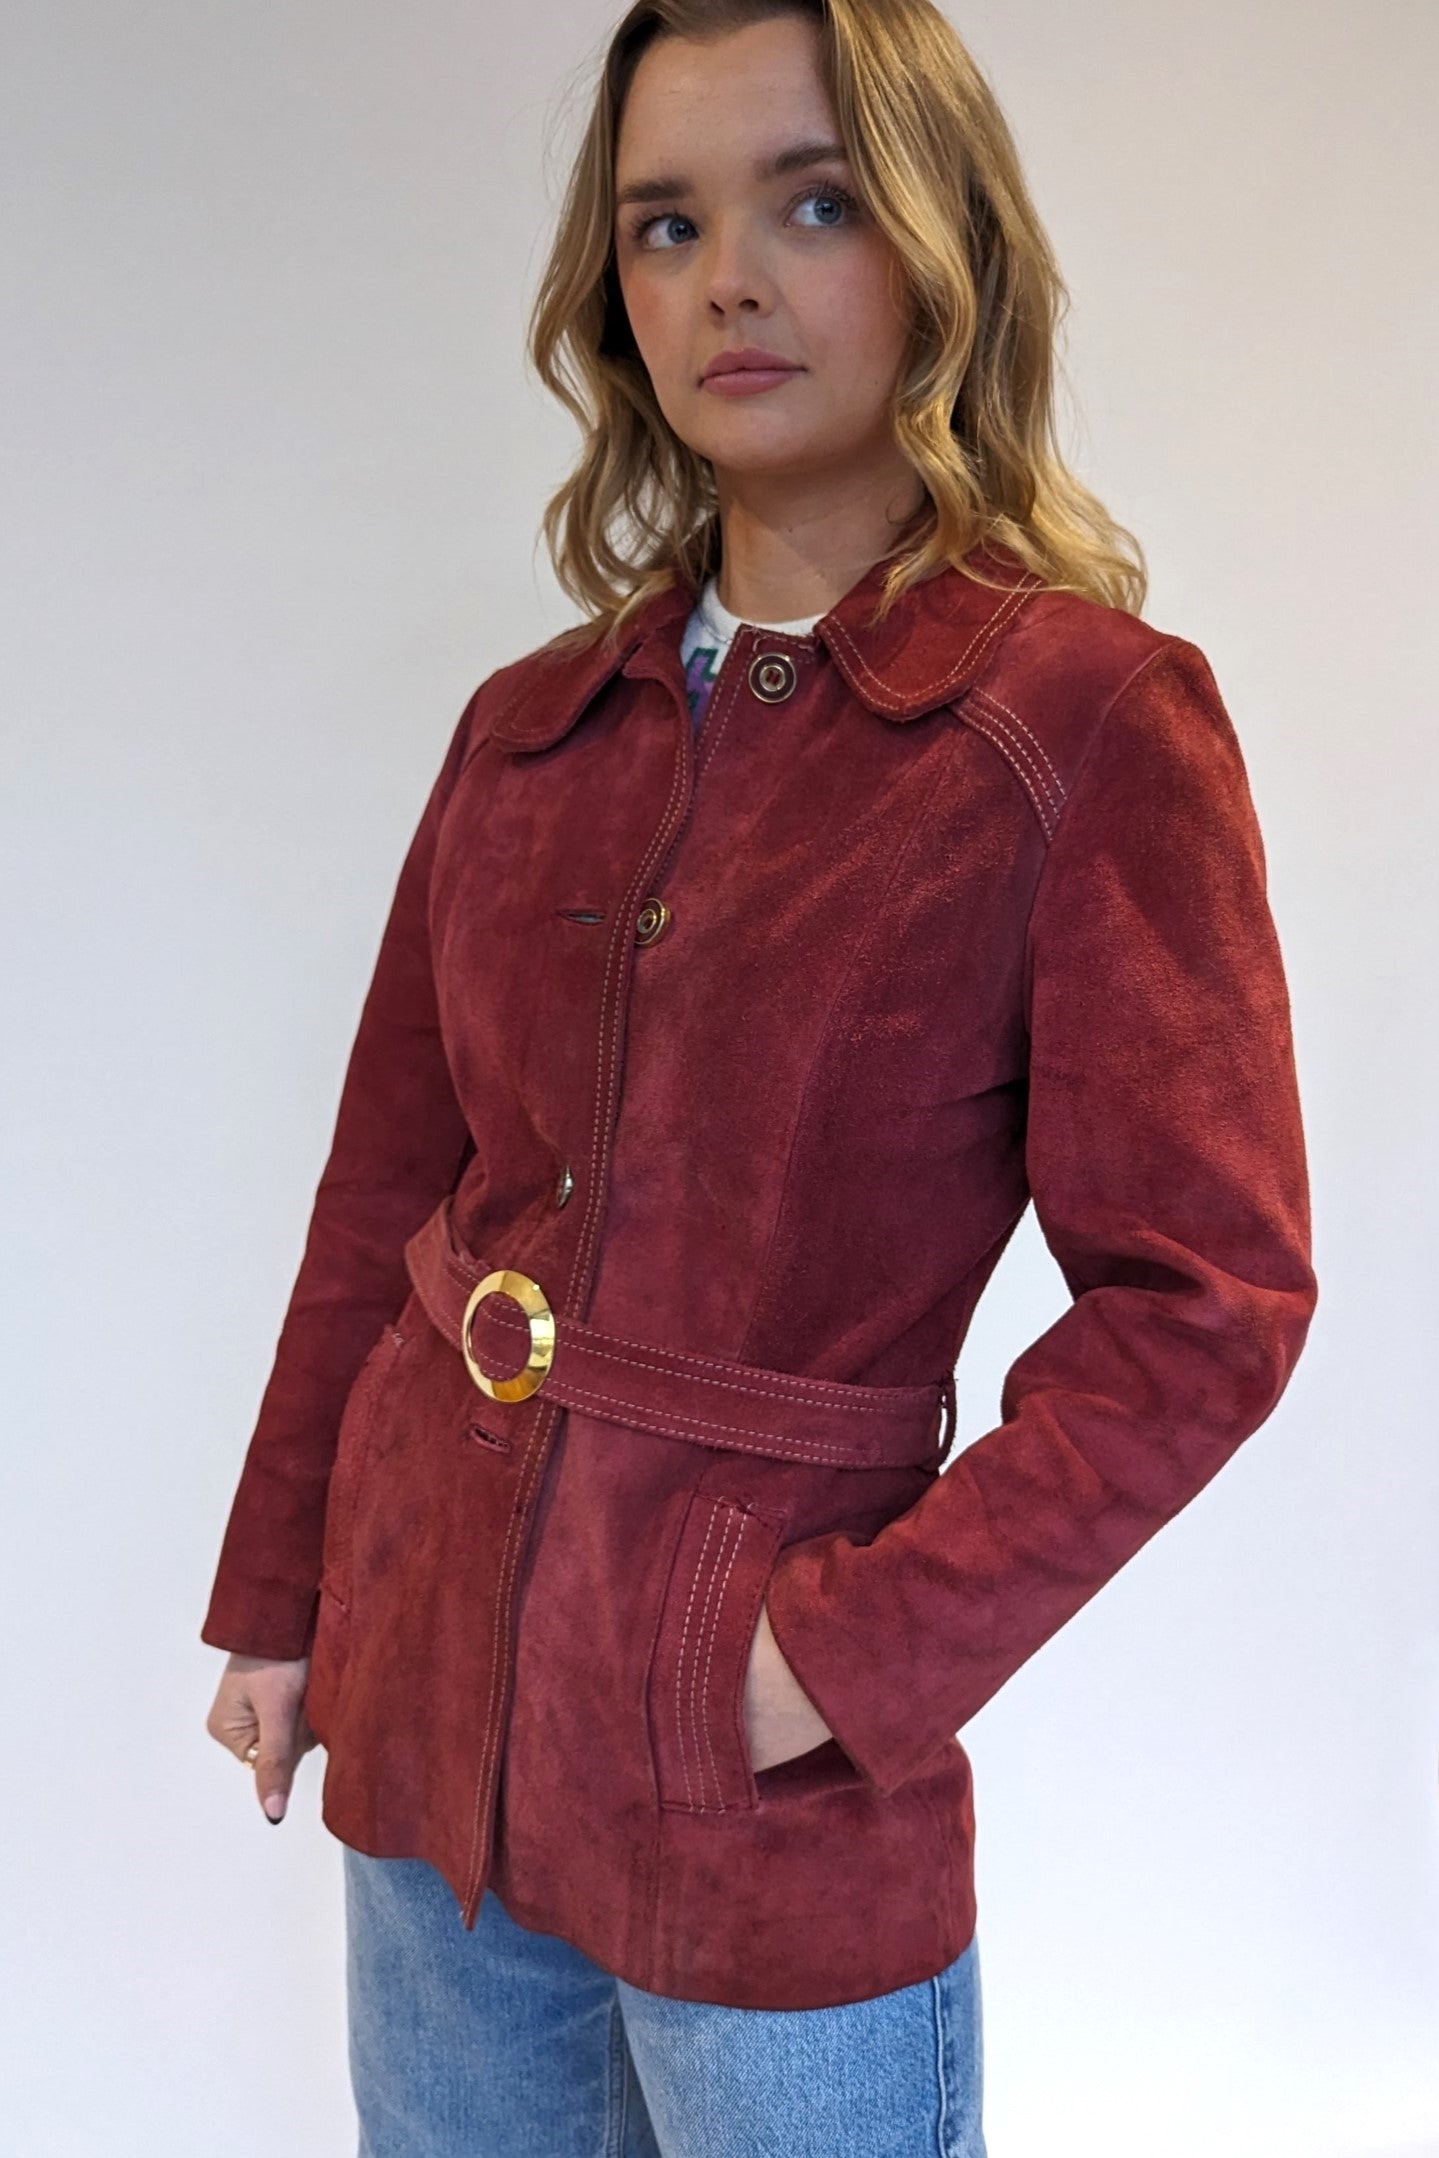 red vintage 1970s coat with gold buckle